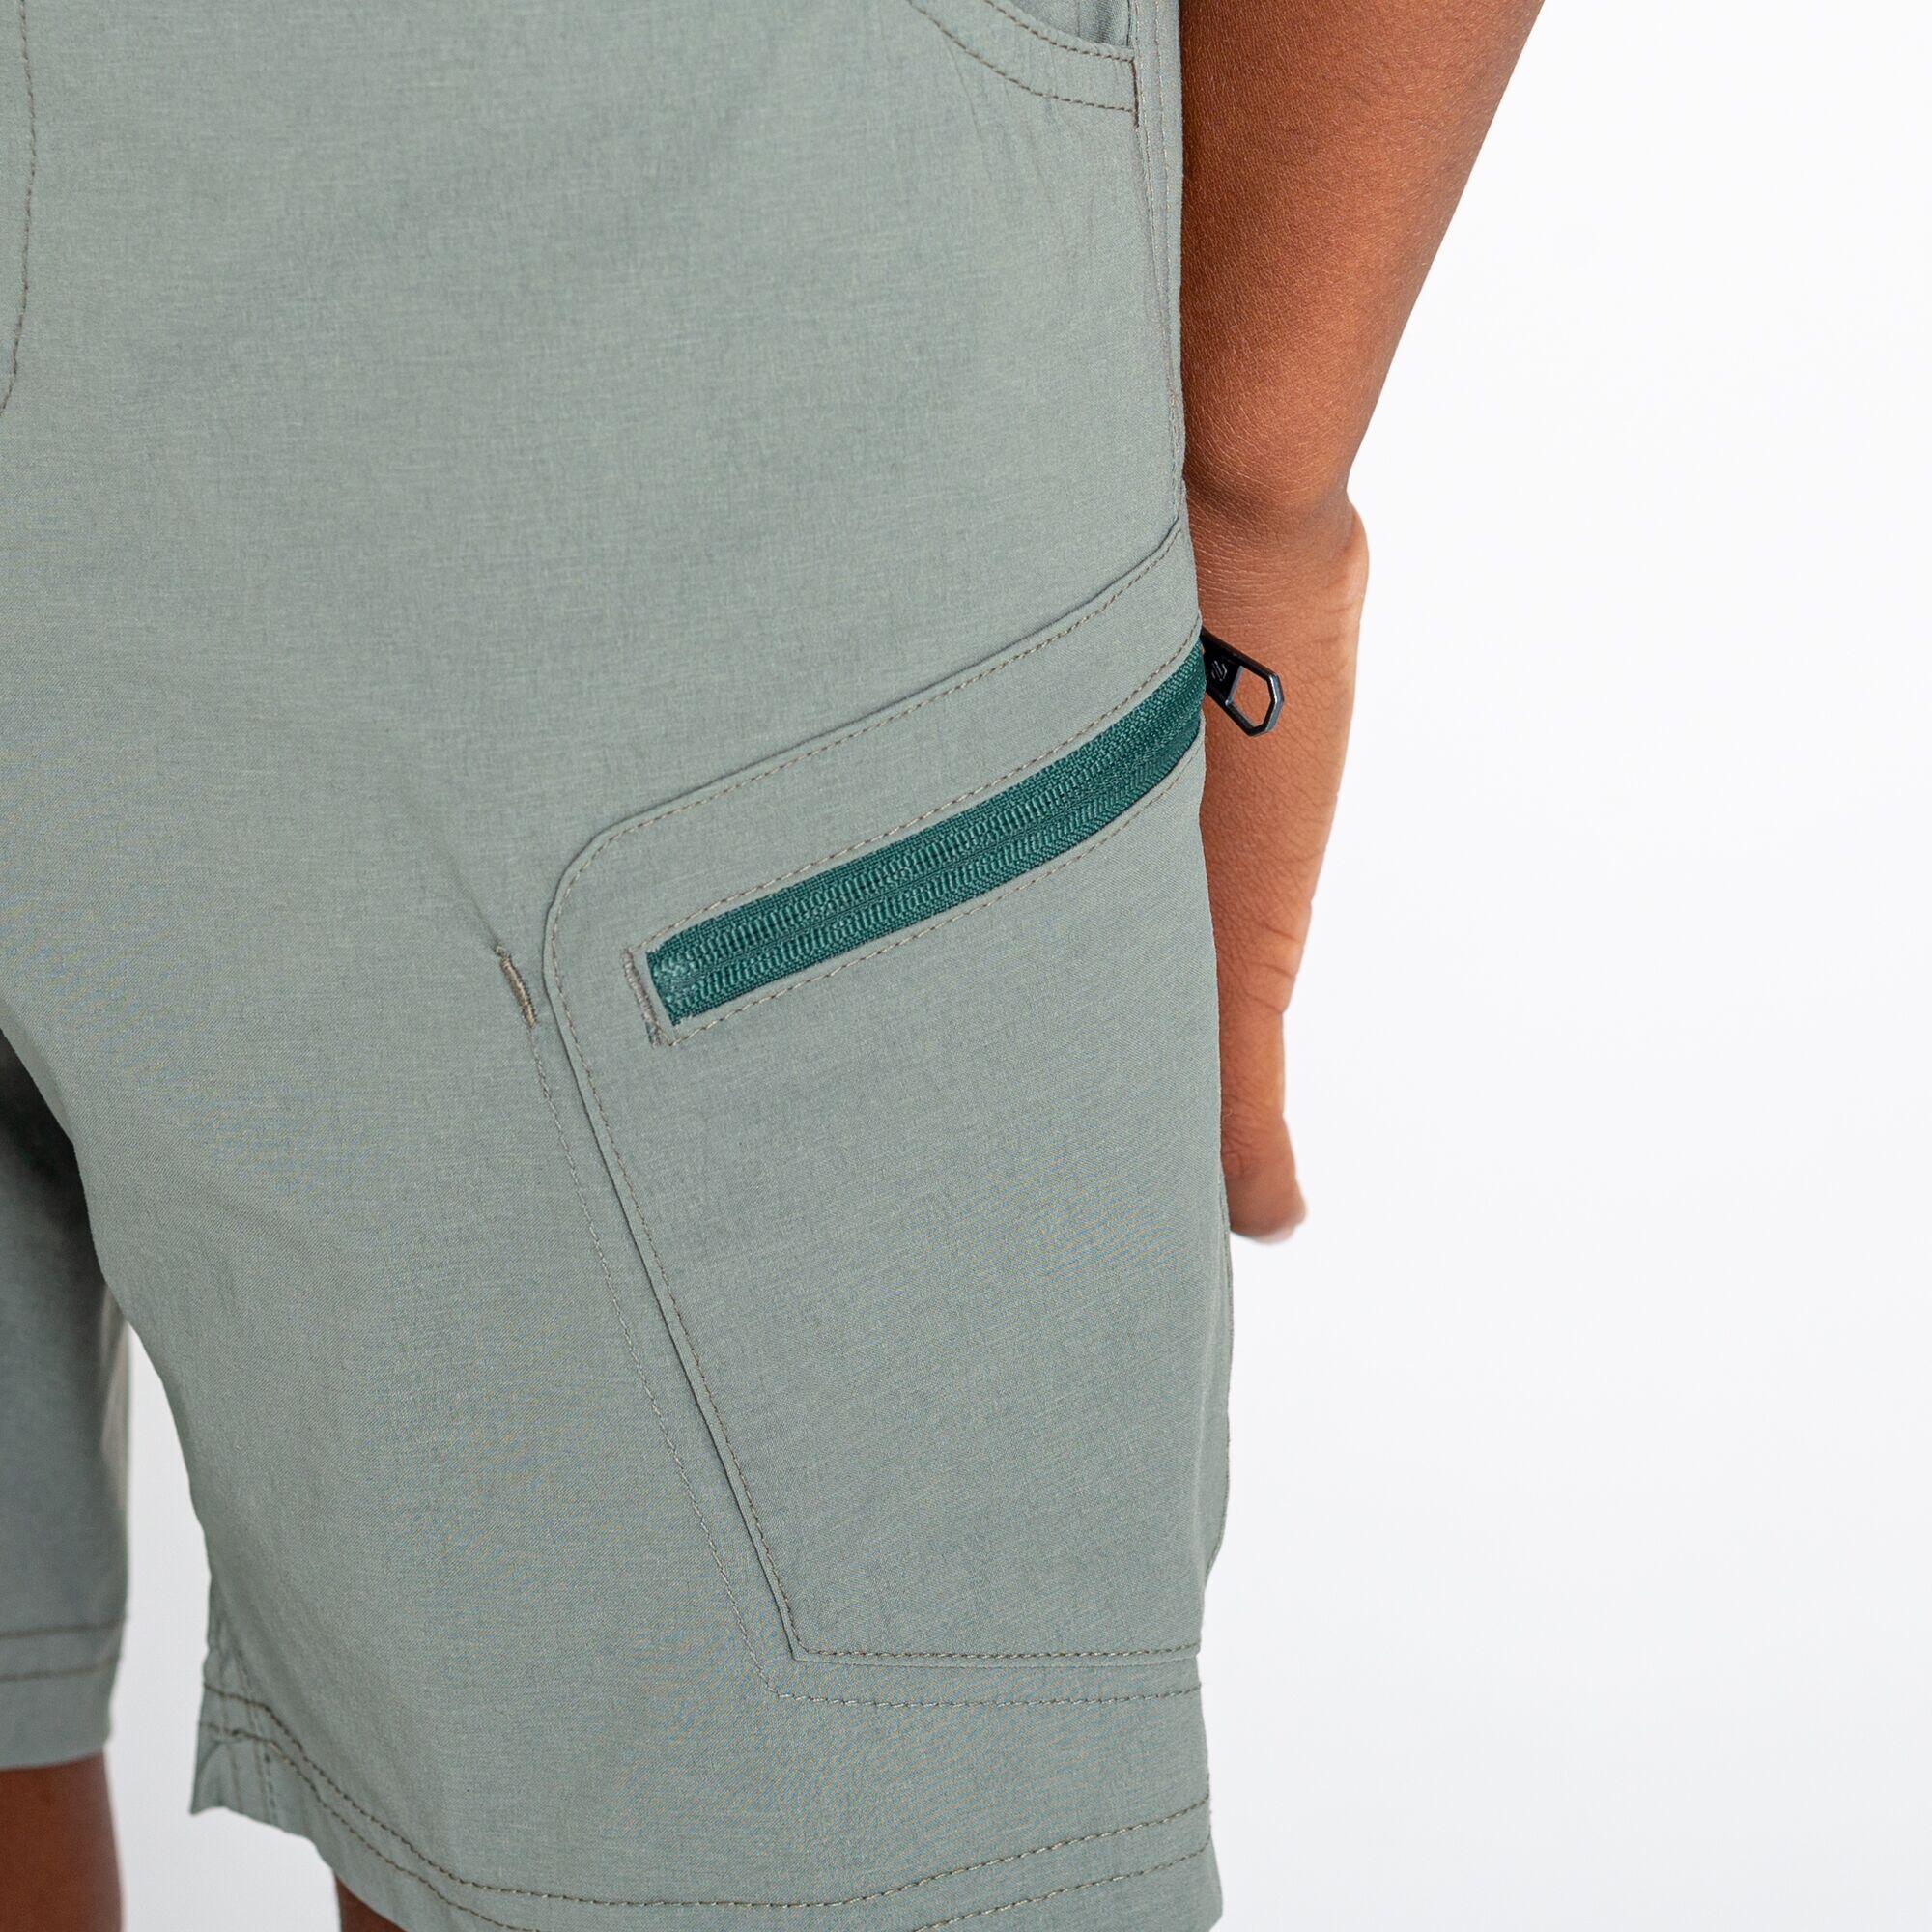 Childrens/Kids Reprise II Shorts (Agave Green) 4/5